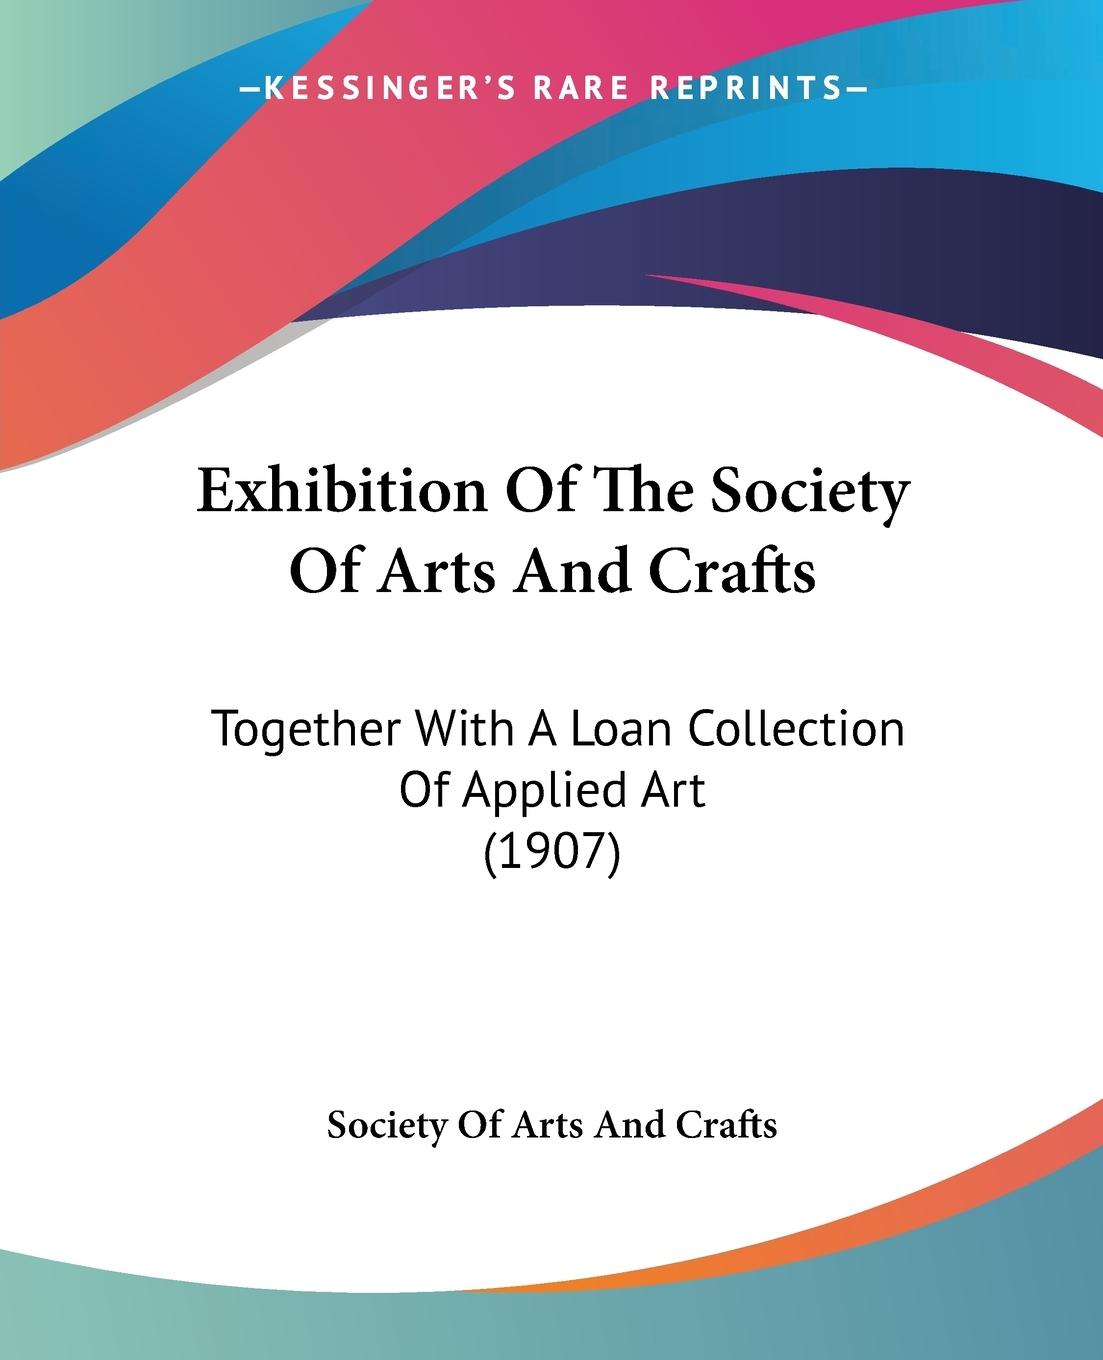 Exhibition Of The Society Of Arts And Crafts - Society Of Arts And Crafts